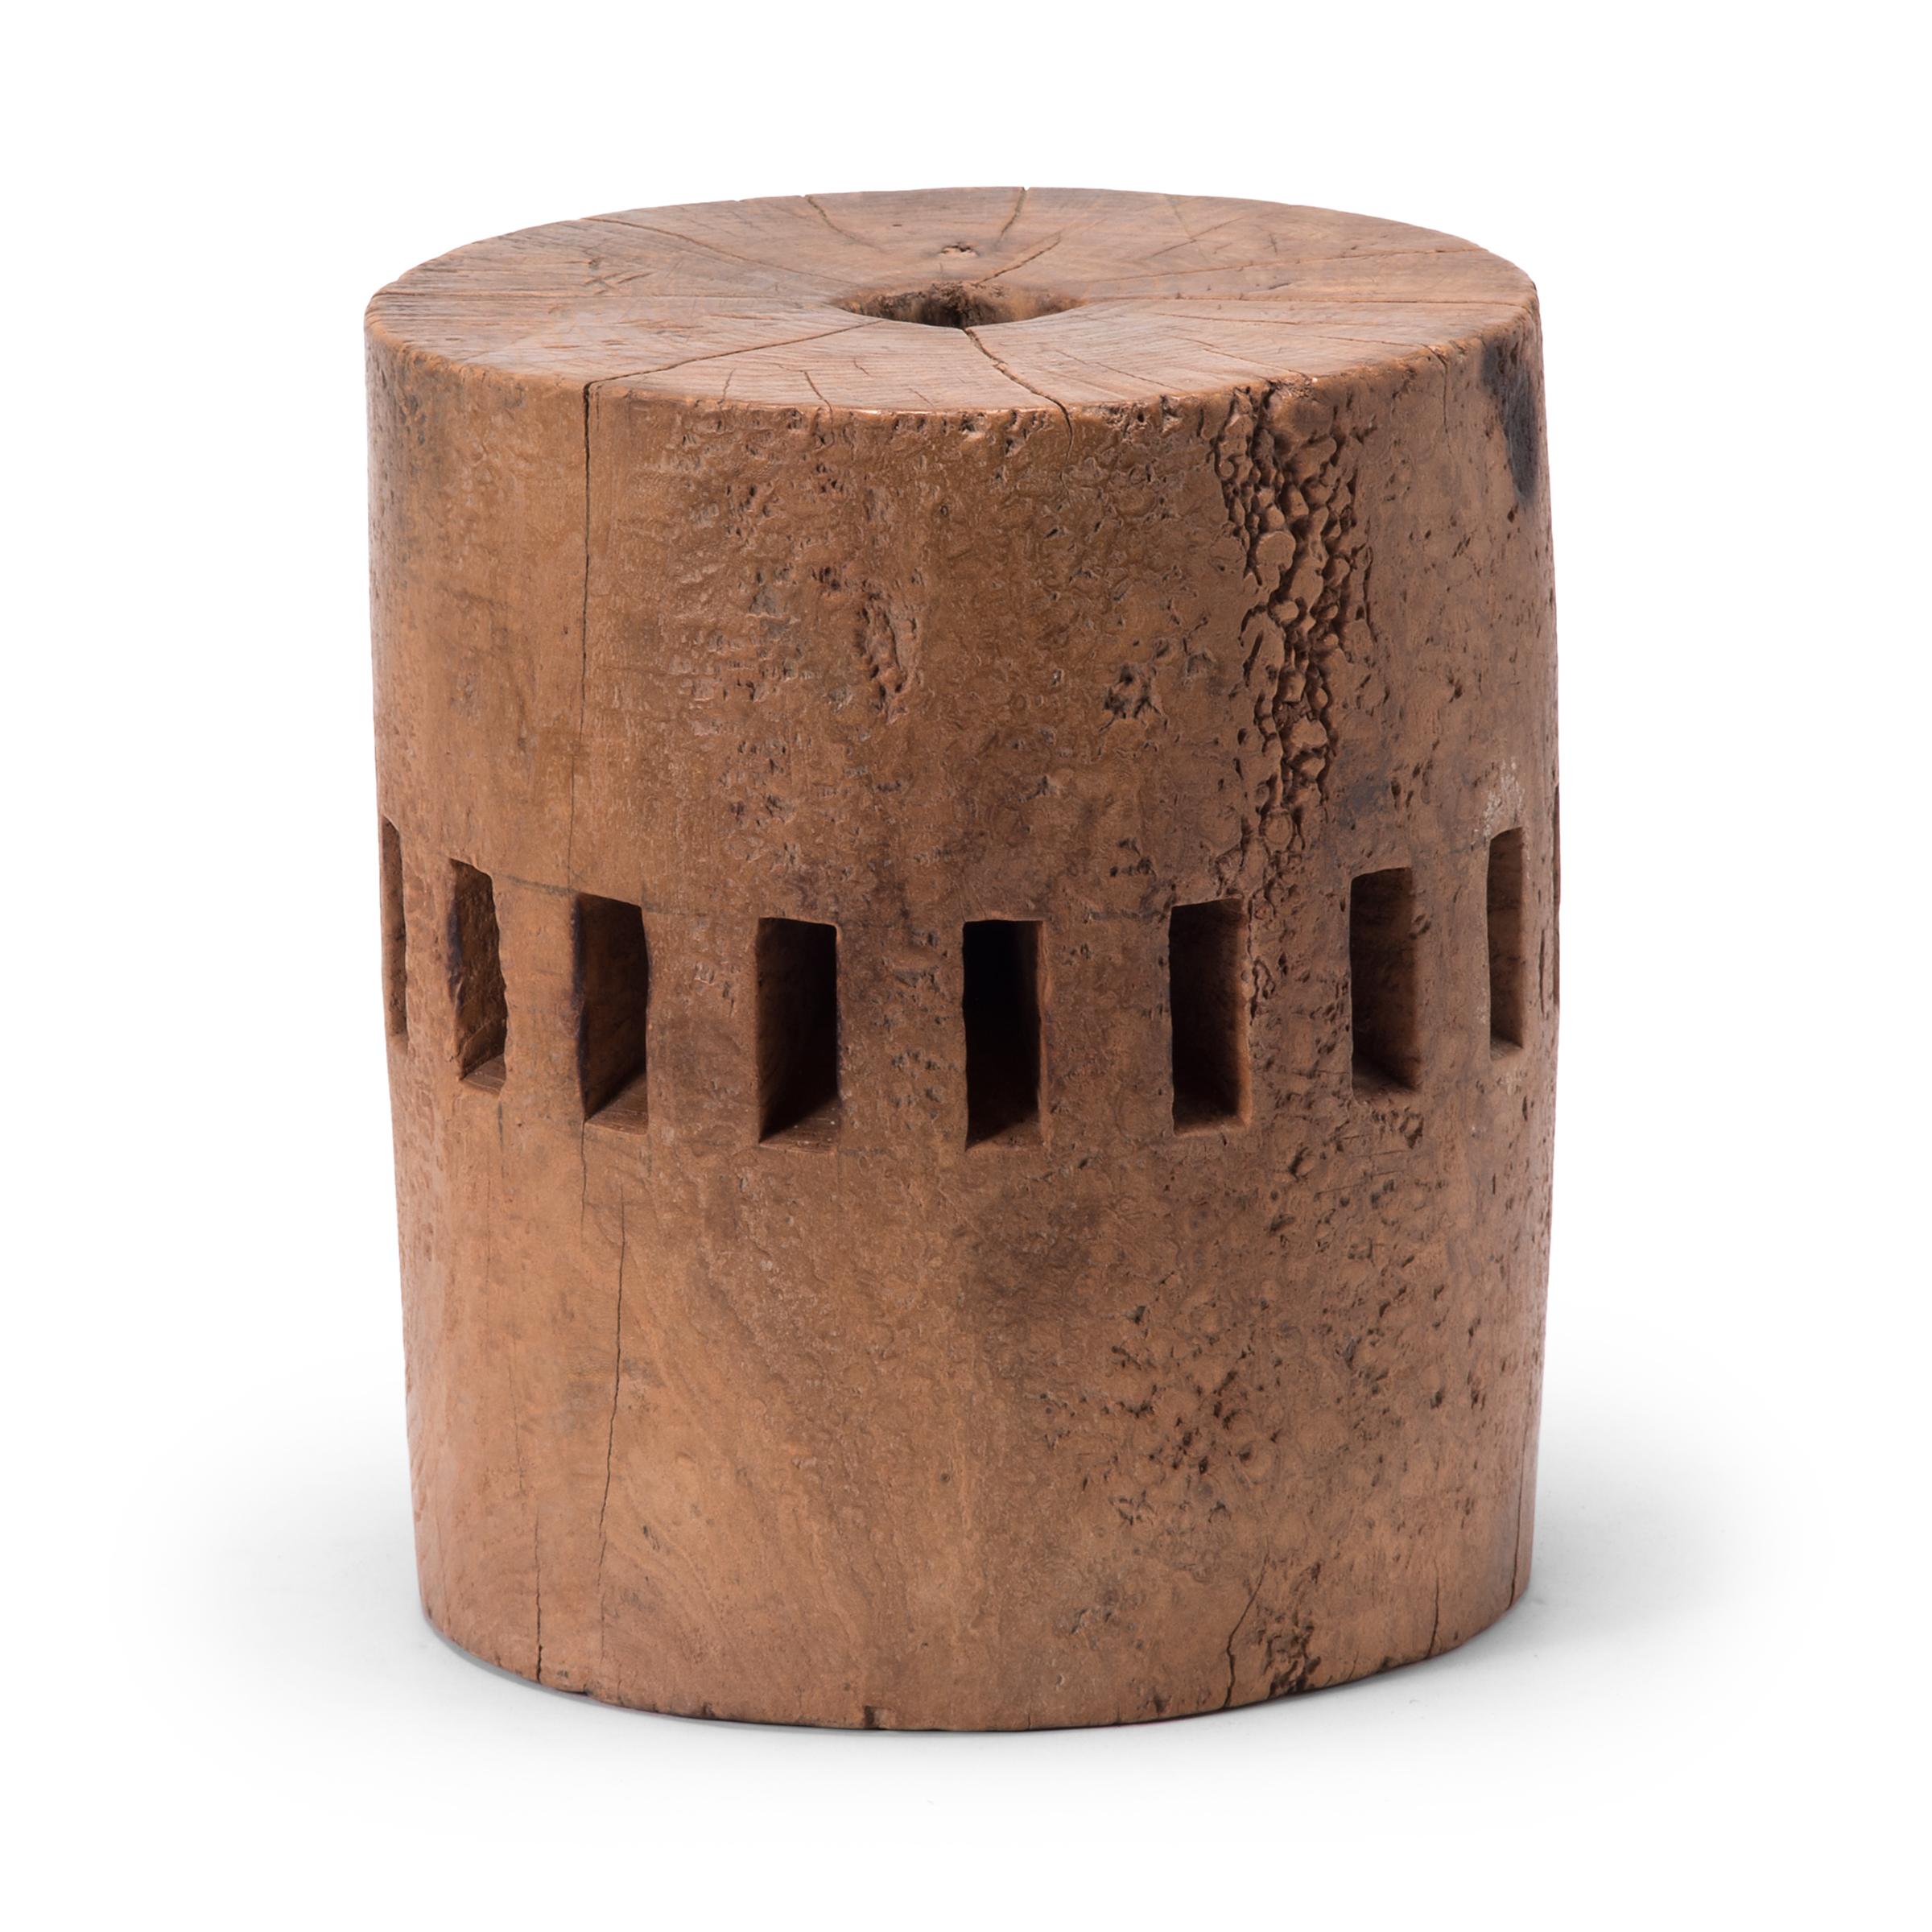 Carved from a single block of fruitwood, this unusual piece was once part of the central wheel shaft of a Qing-dynasty grain mill. Each slot once secured a peg of a large water wheel, which harnessed river currents to draw a millstone across grain